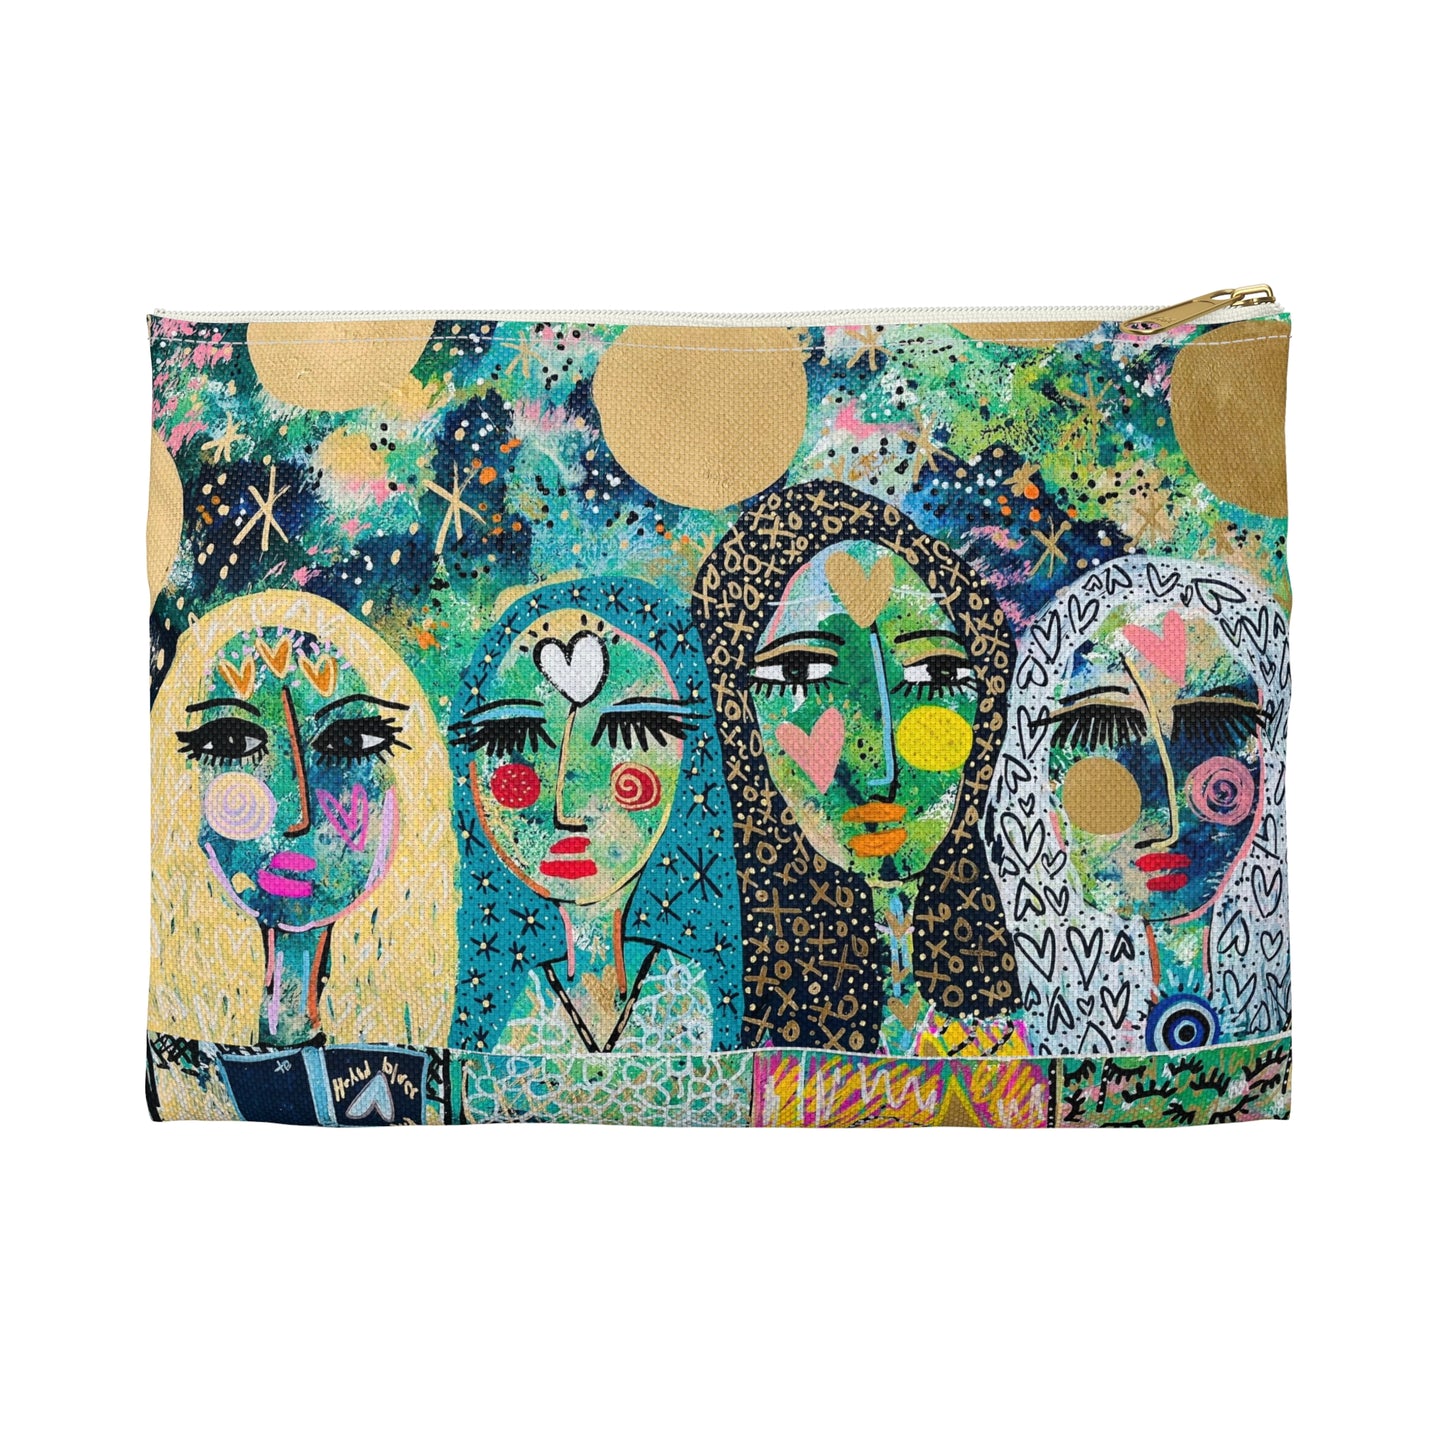 "The Witches" Accessory Pouch